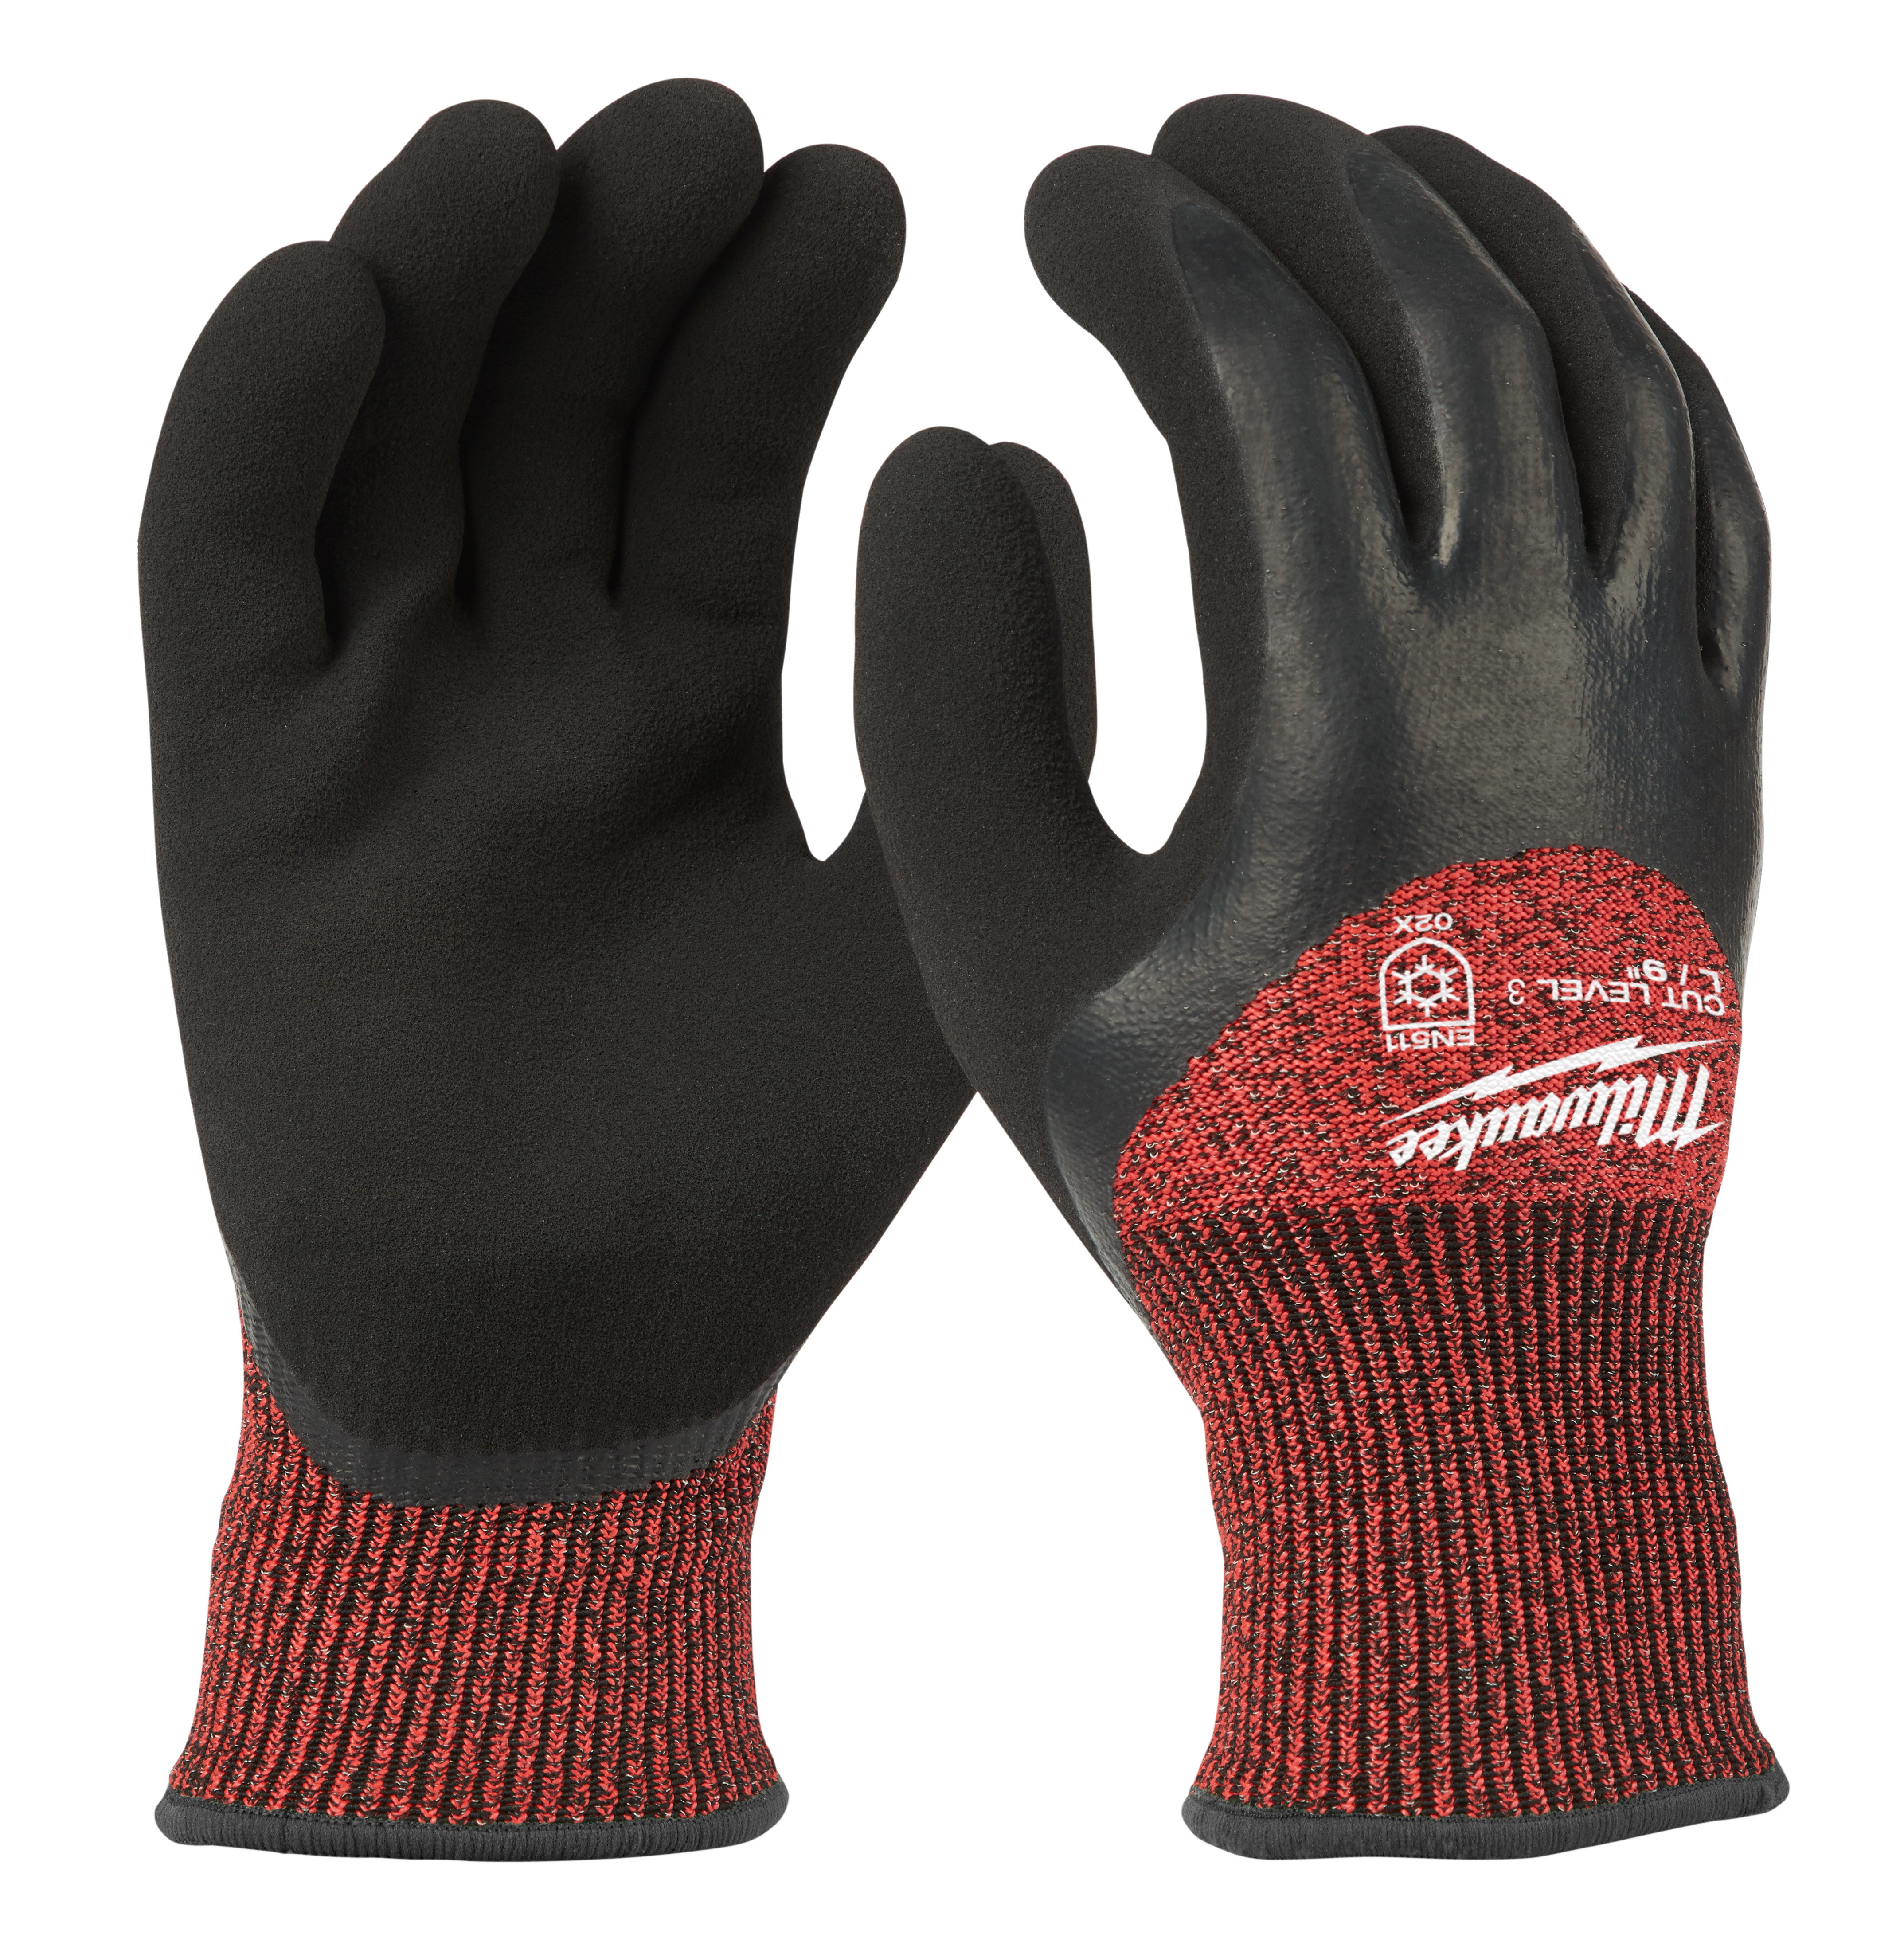 Cut Level 3 Insulated Gloves -S- 12 Pack